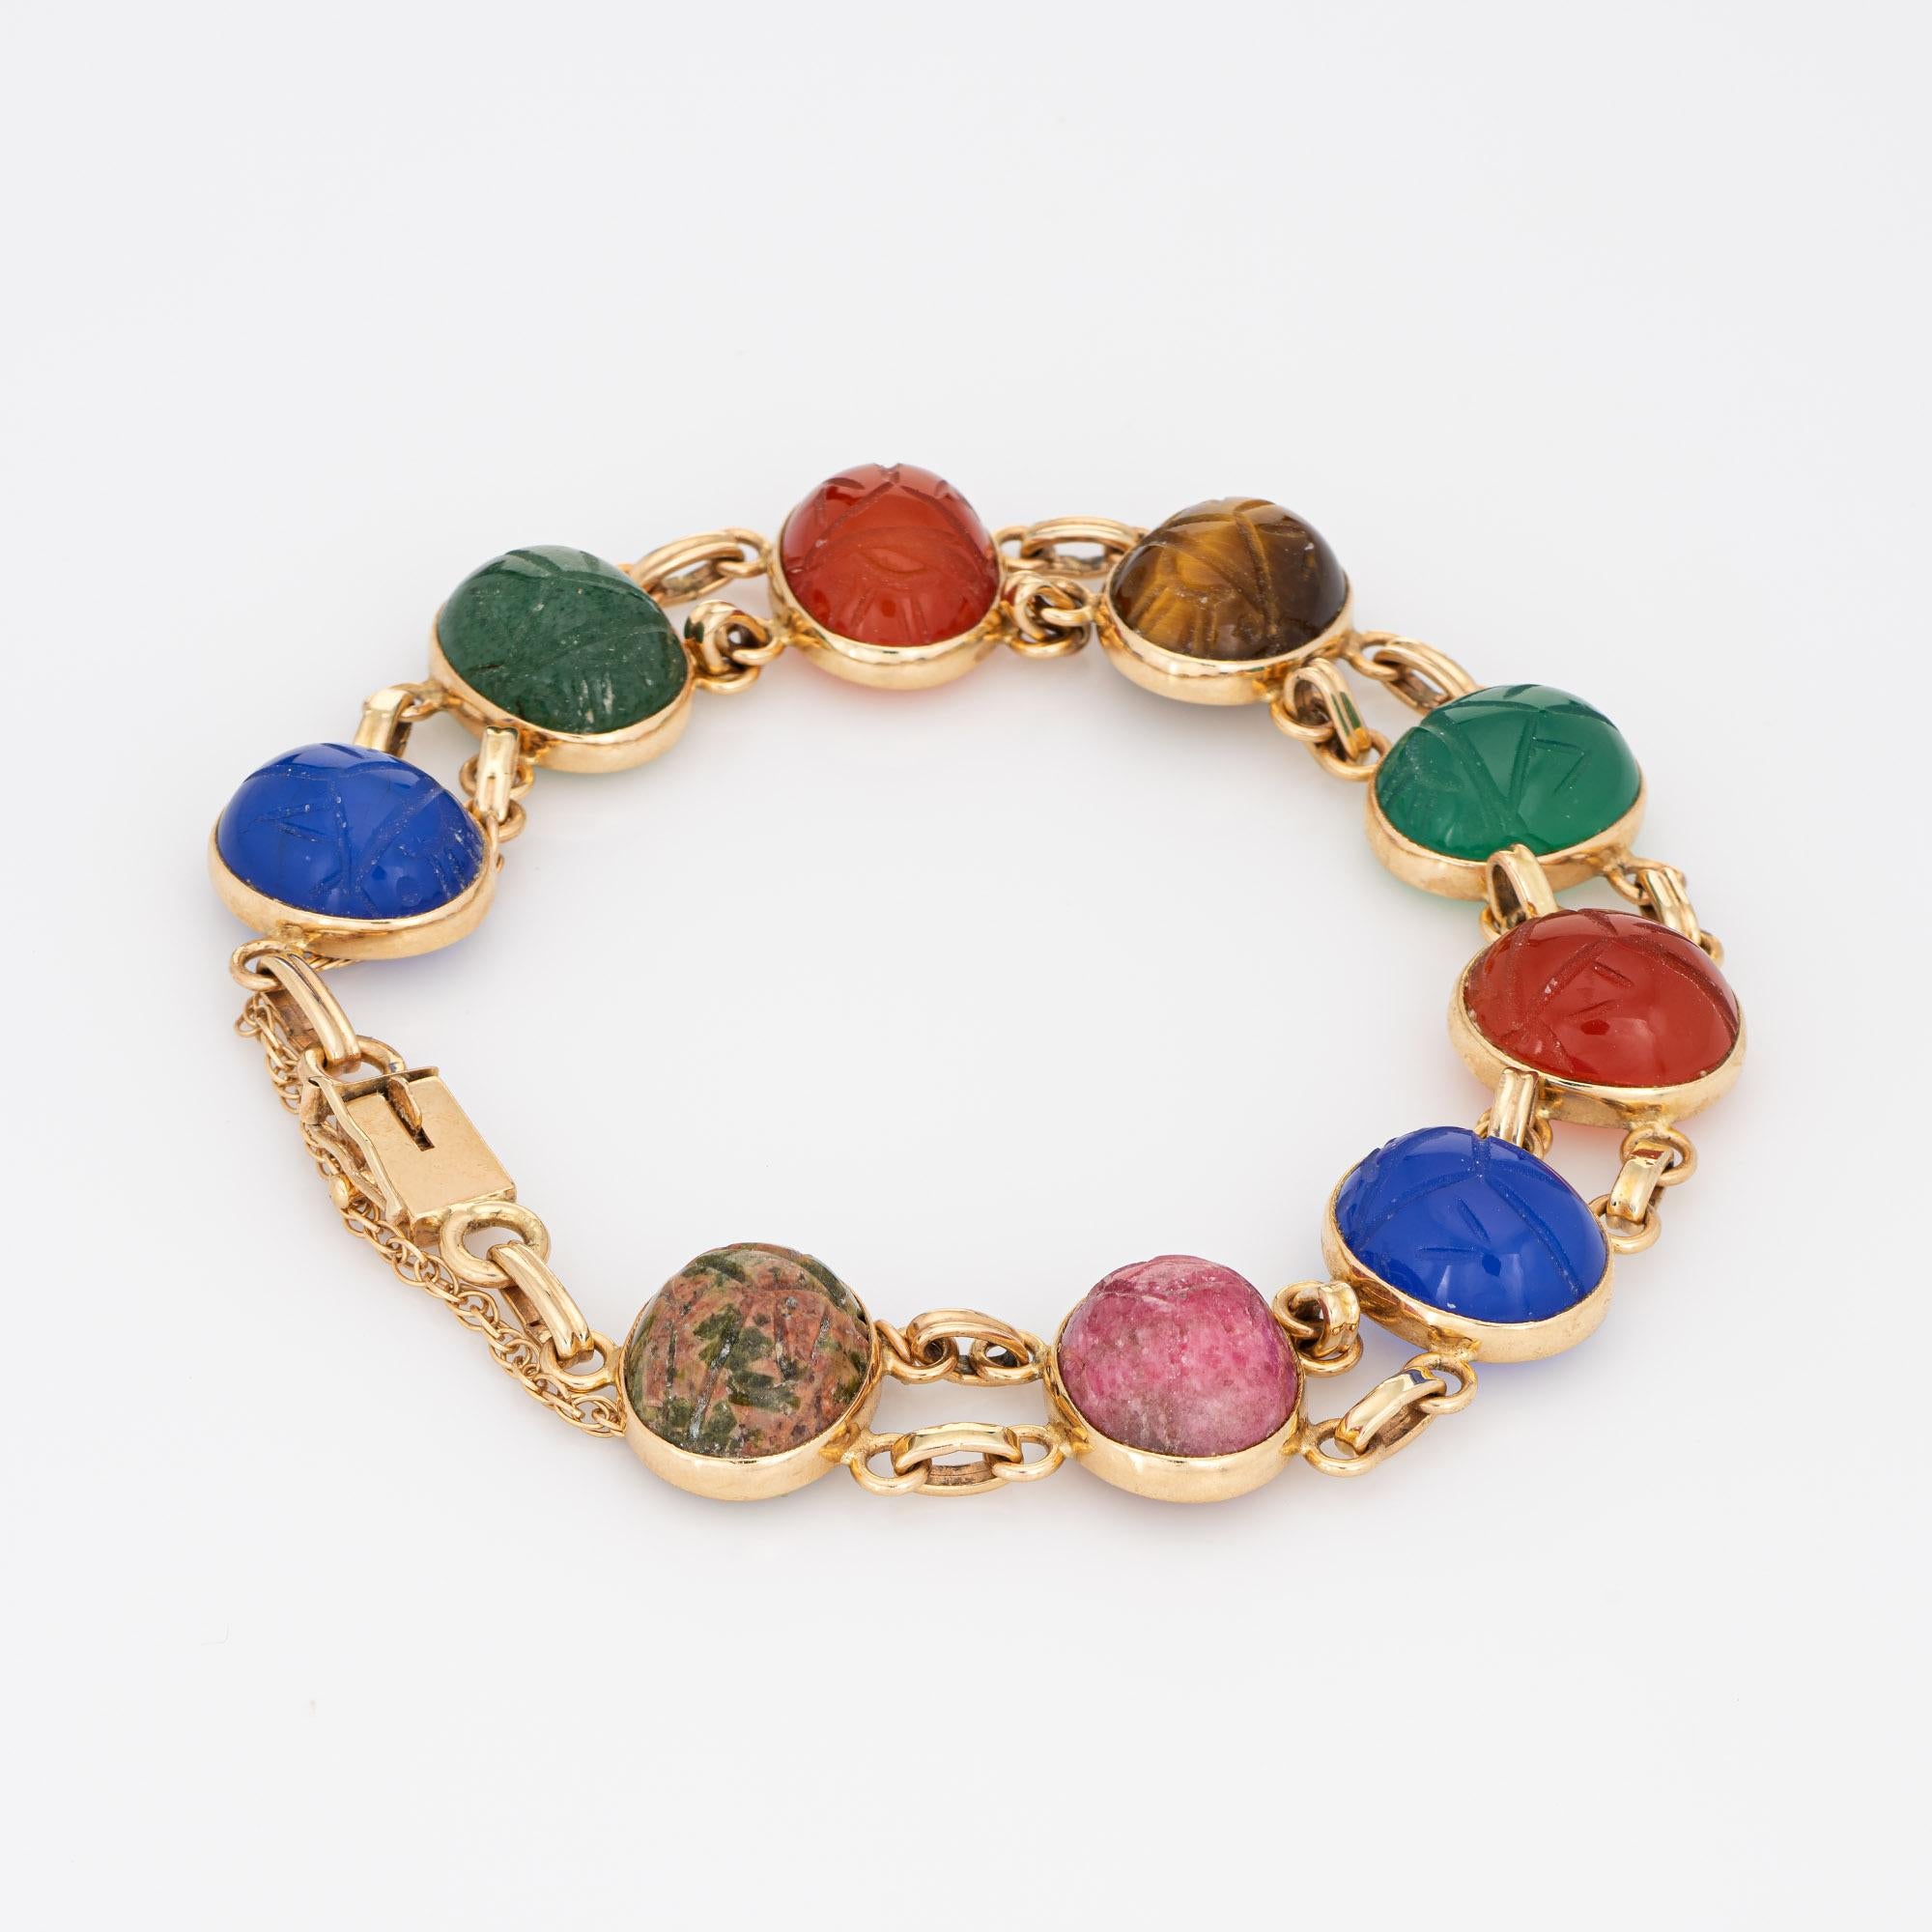 Stylish and finely detailed vintage scarab bracelet crafted in 14k yellow gold. 

Blue & green chalcedony, tigers eye, carnelian and rhodochrosite measure 12mm x 10mm. The stones are in very good condition and free of cracks or chips.   

The